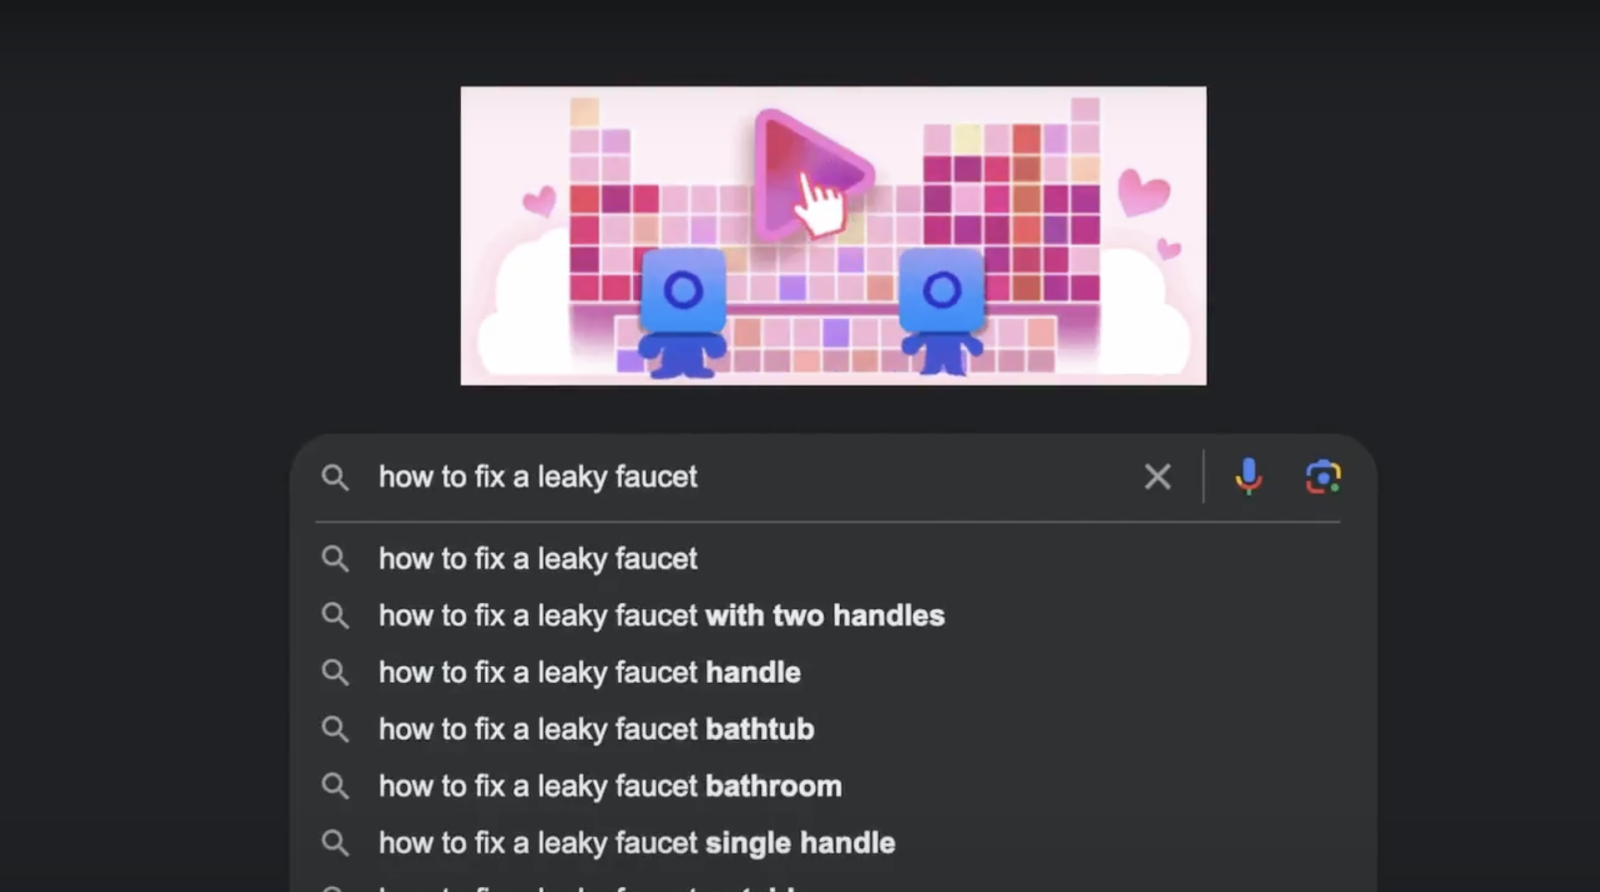 "How to fix a leaky faucet" Google search